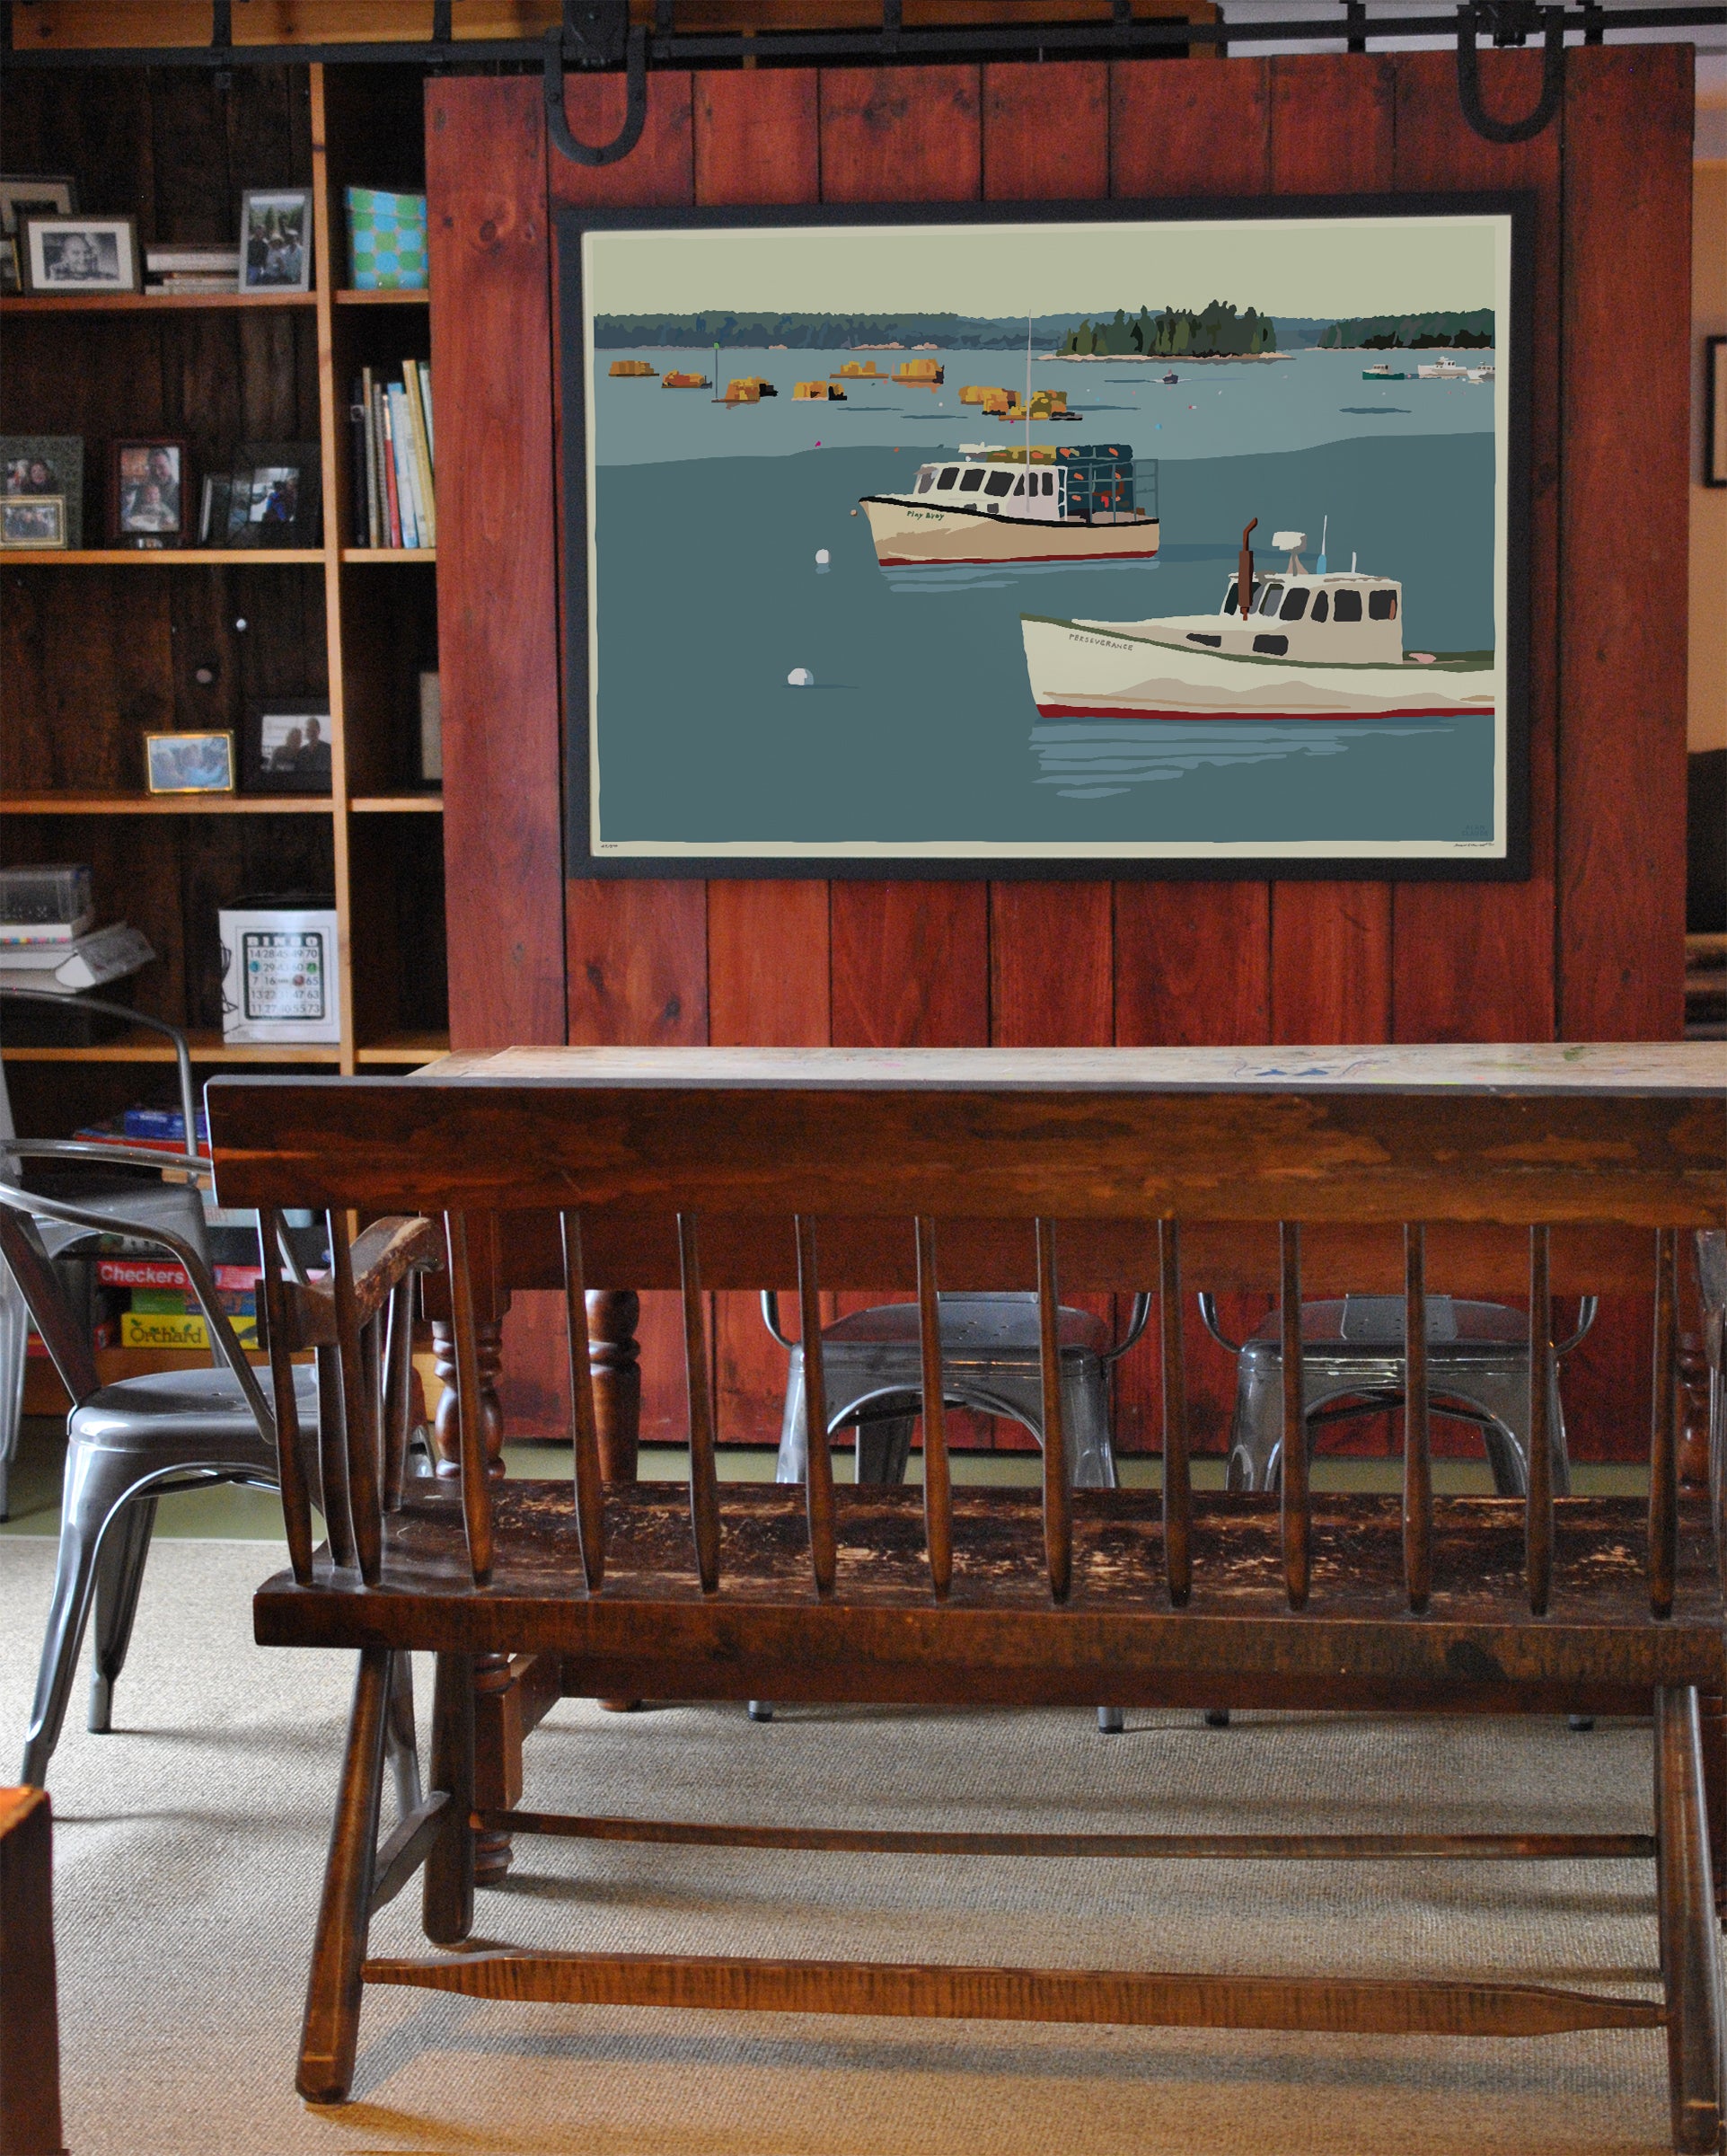 Lobster Boats in Friendship Art Print 36" x 53" Framed Wall Poster By Alan Claude - Maine